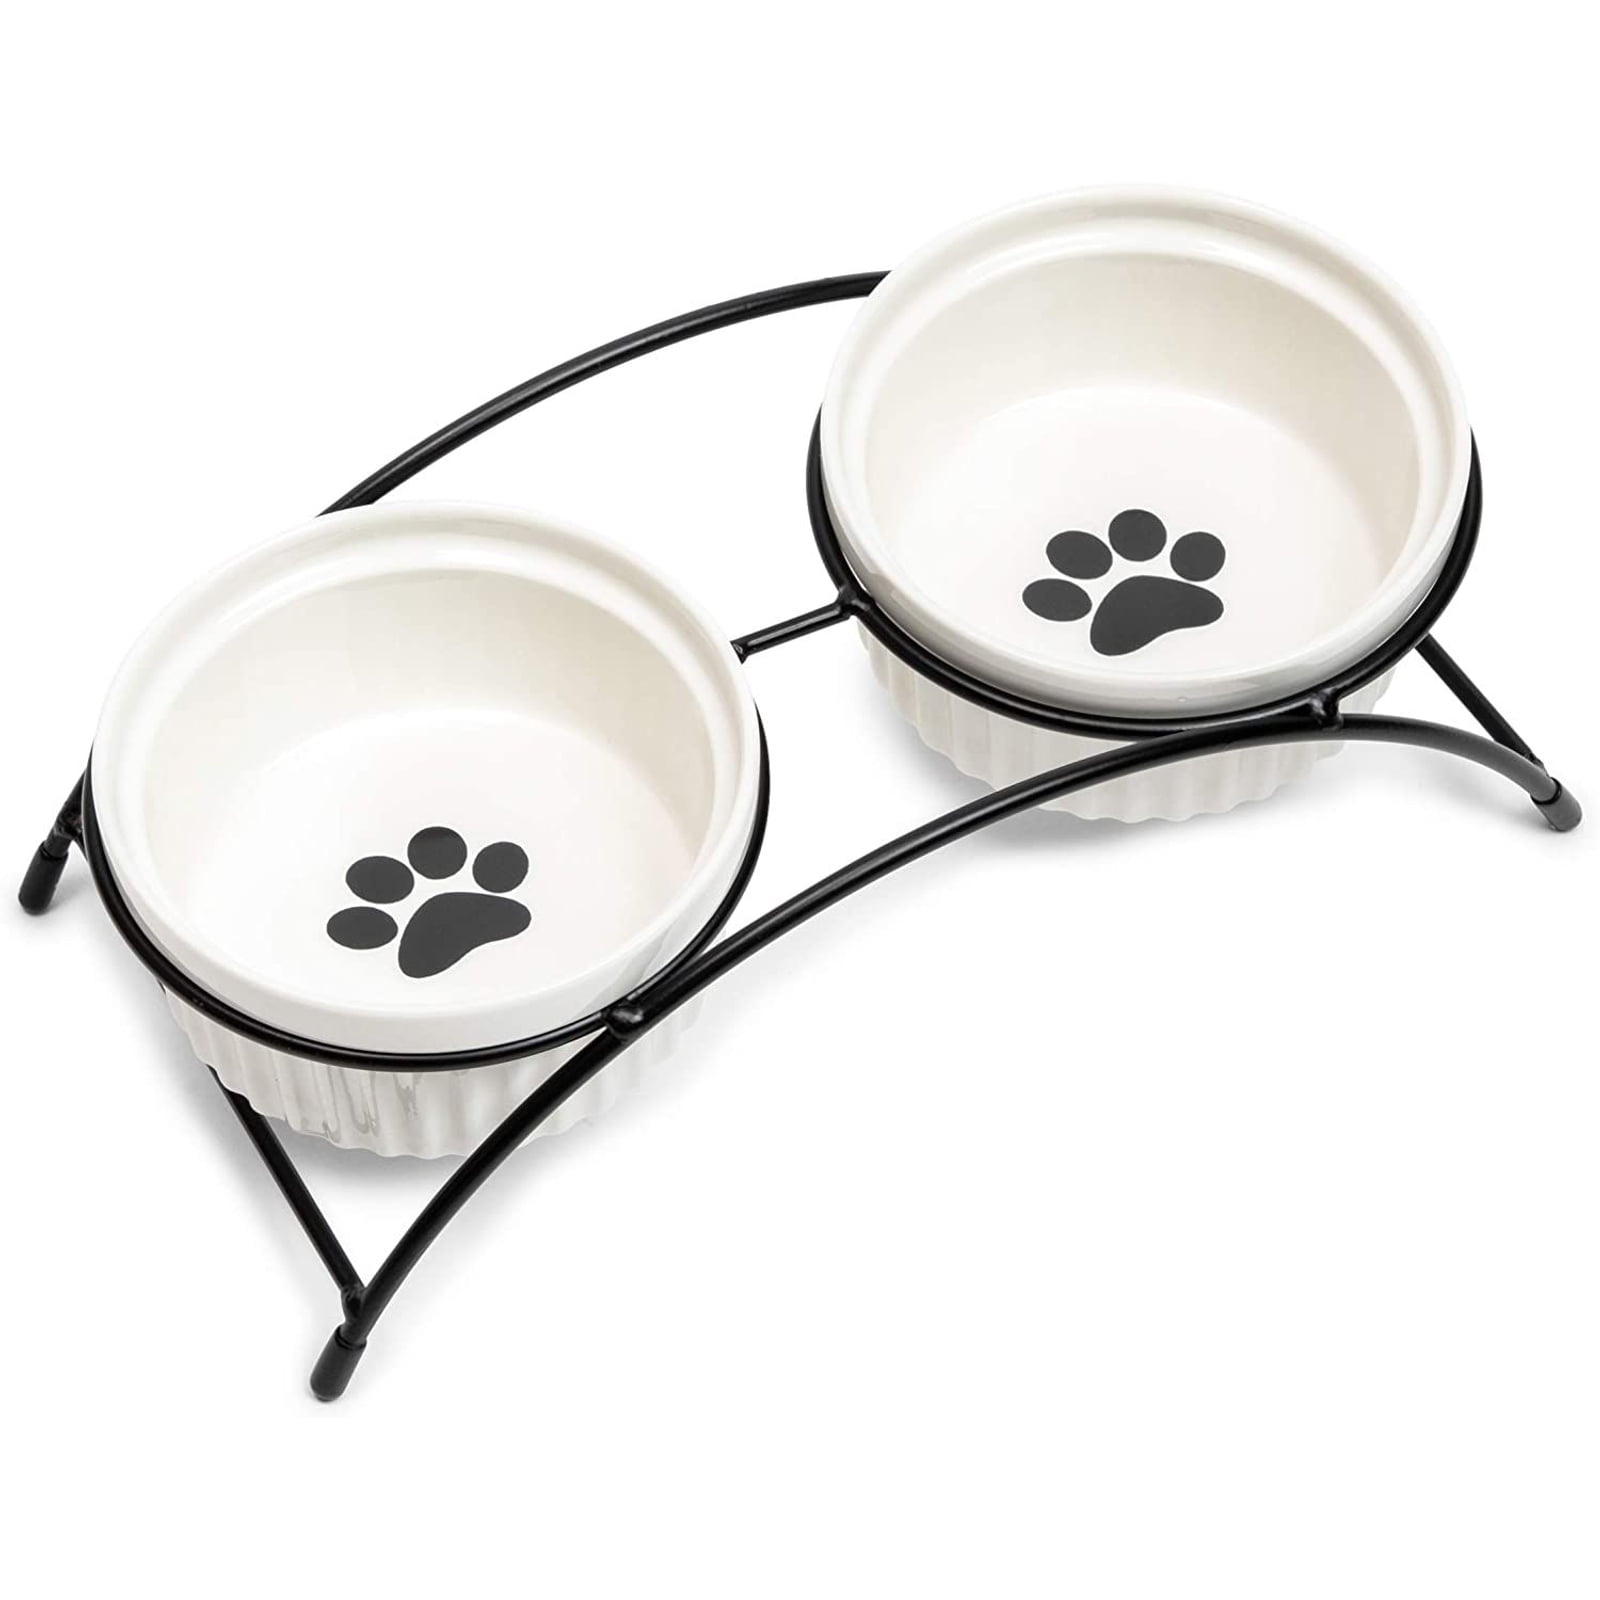 Y YHY Ceramic Dog and Cat Bowl Set, 24oz Dog Food Water Bowls with Wooden  Stand, Modern Cute Weighted Pet Bowls Set for Small Size Dogs & Medium  Sized